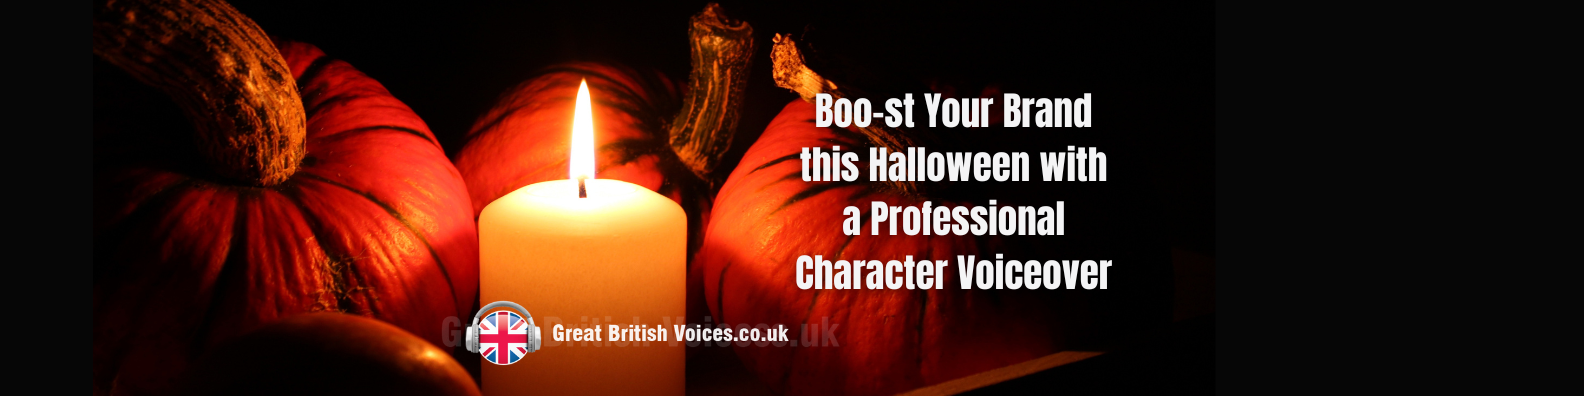 Halloween character voiceover great british voices - Uk voice actor agency